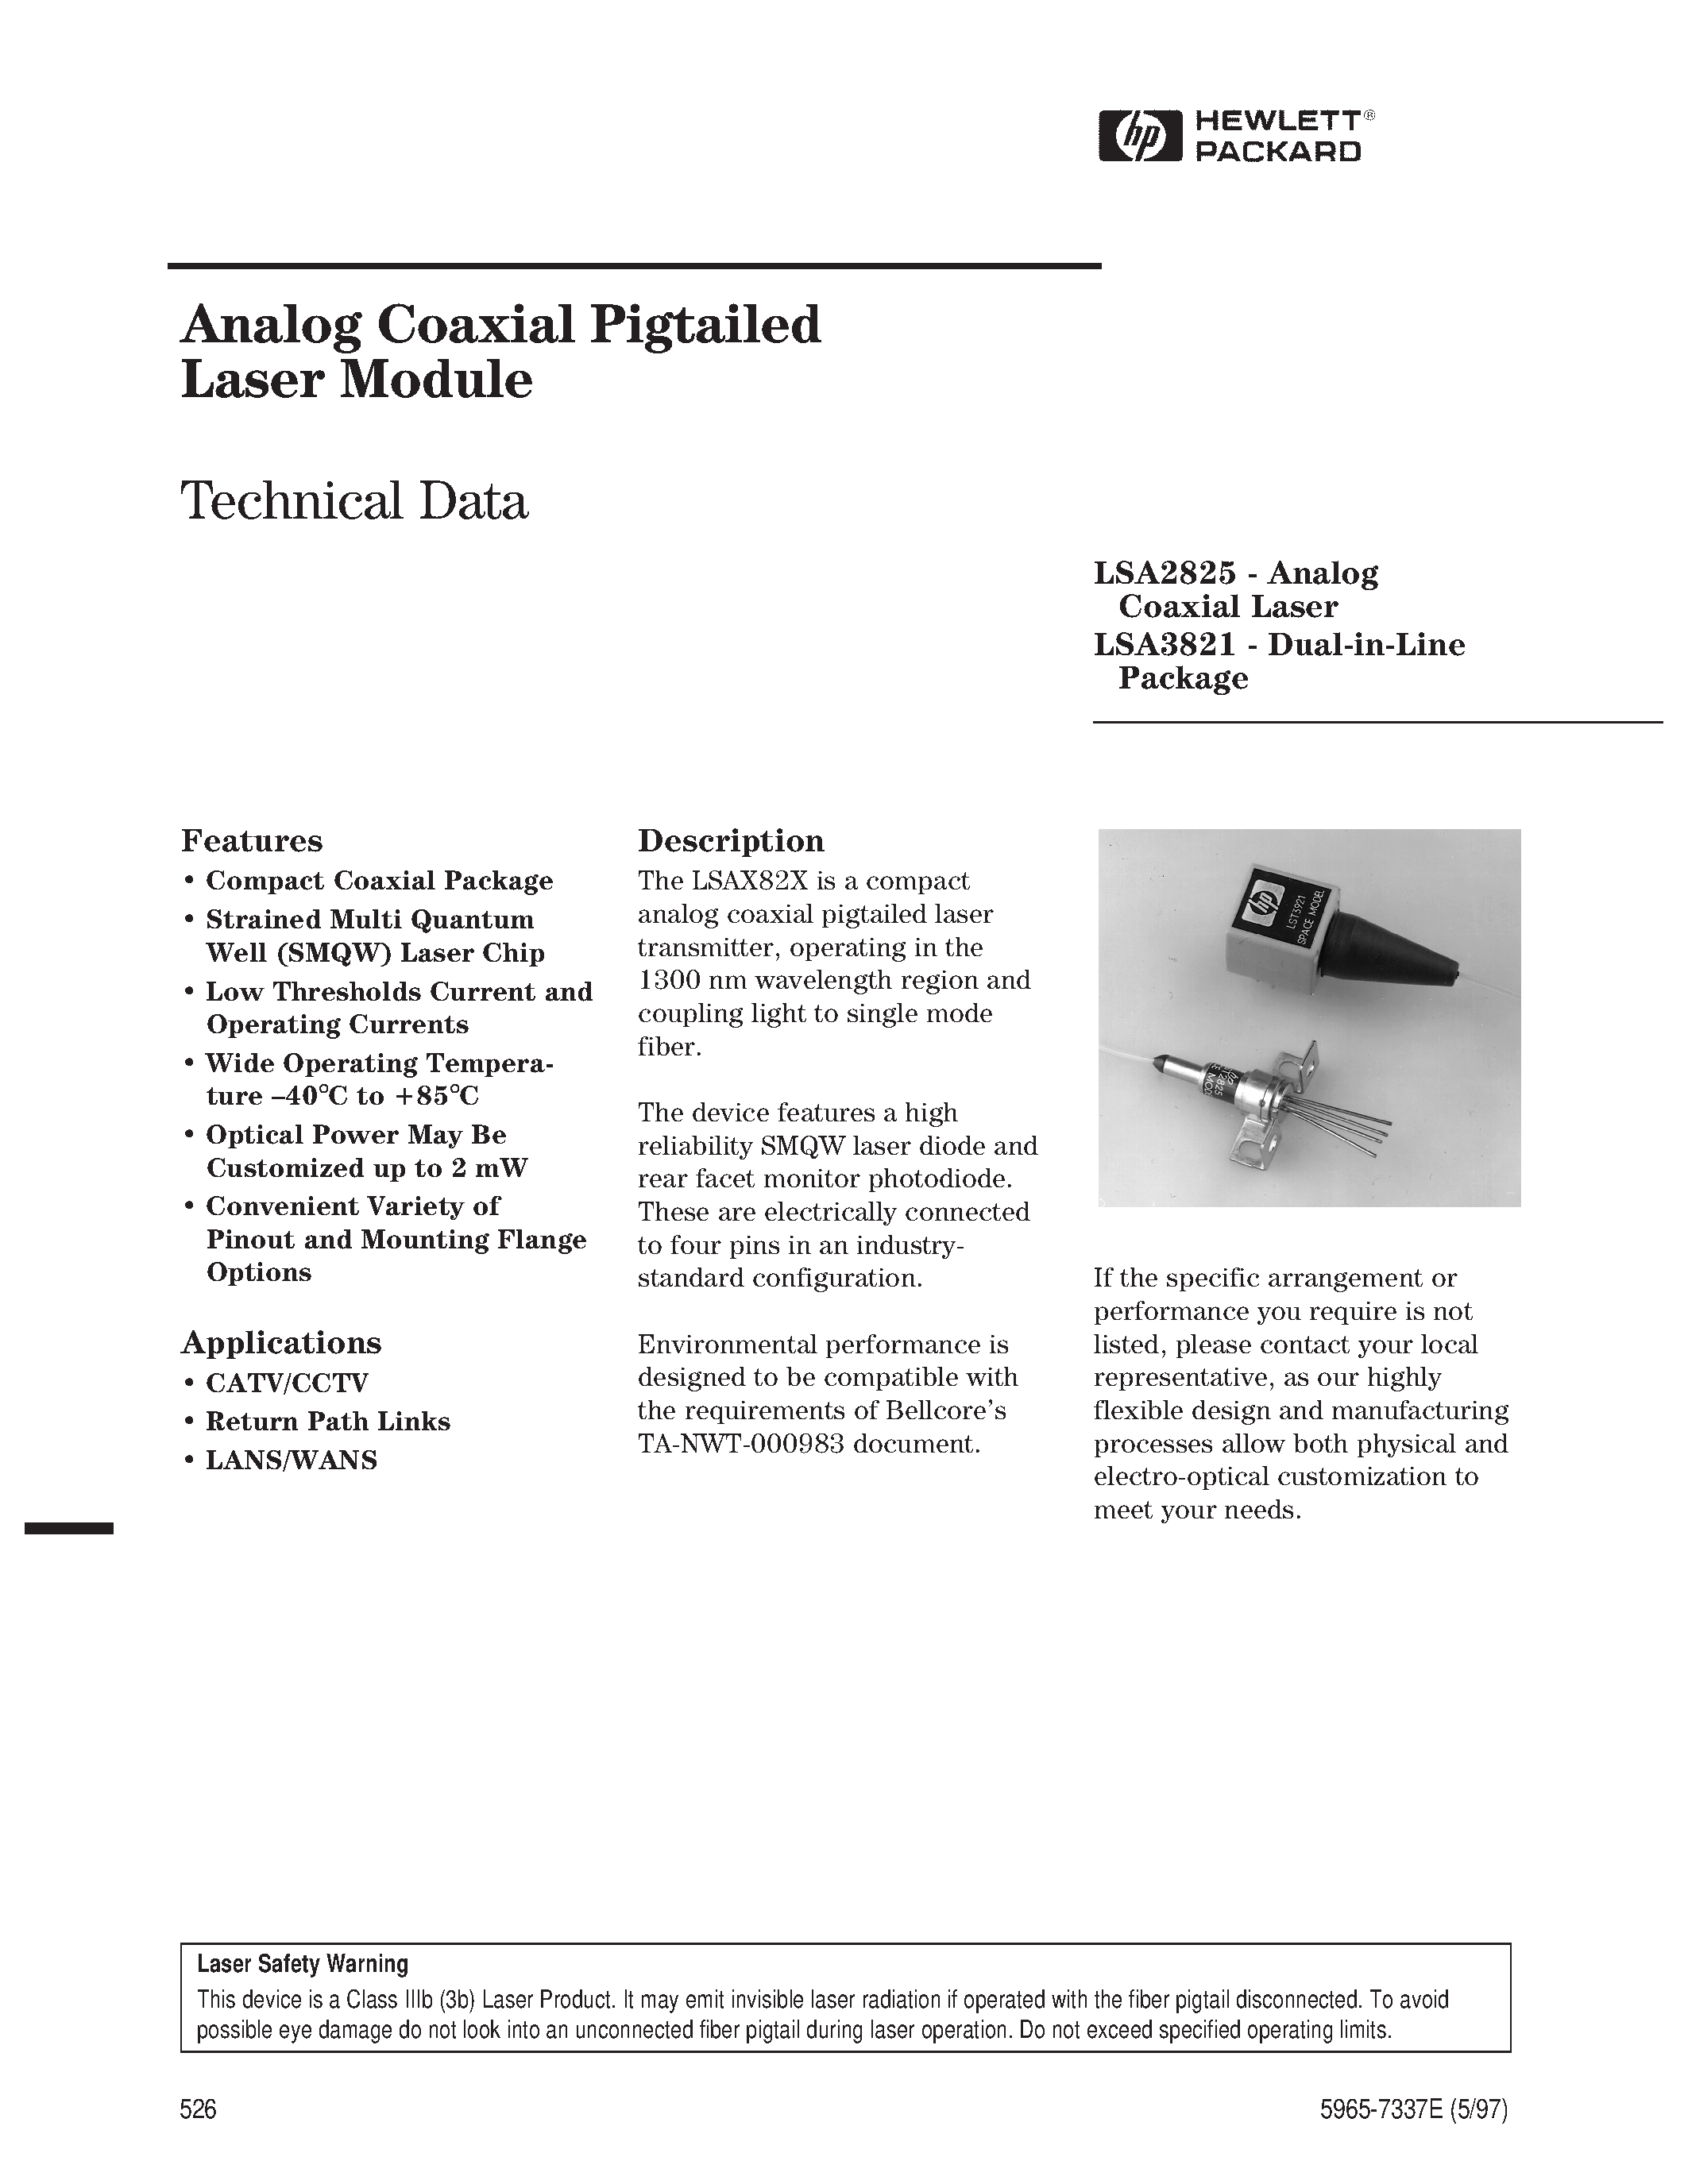 Datasheet LSA2825-B-SF - Analog Coaxial Pigtailed Laser Module page 1